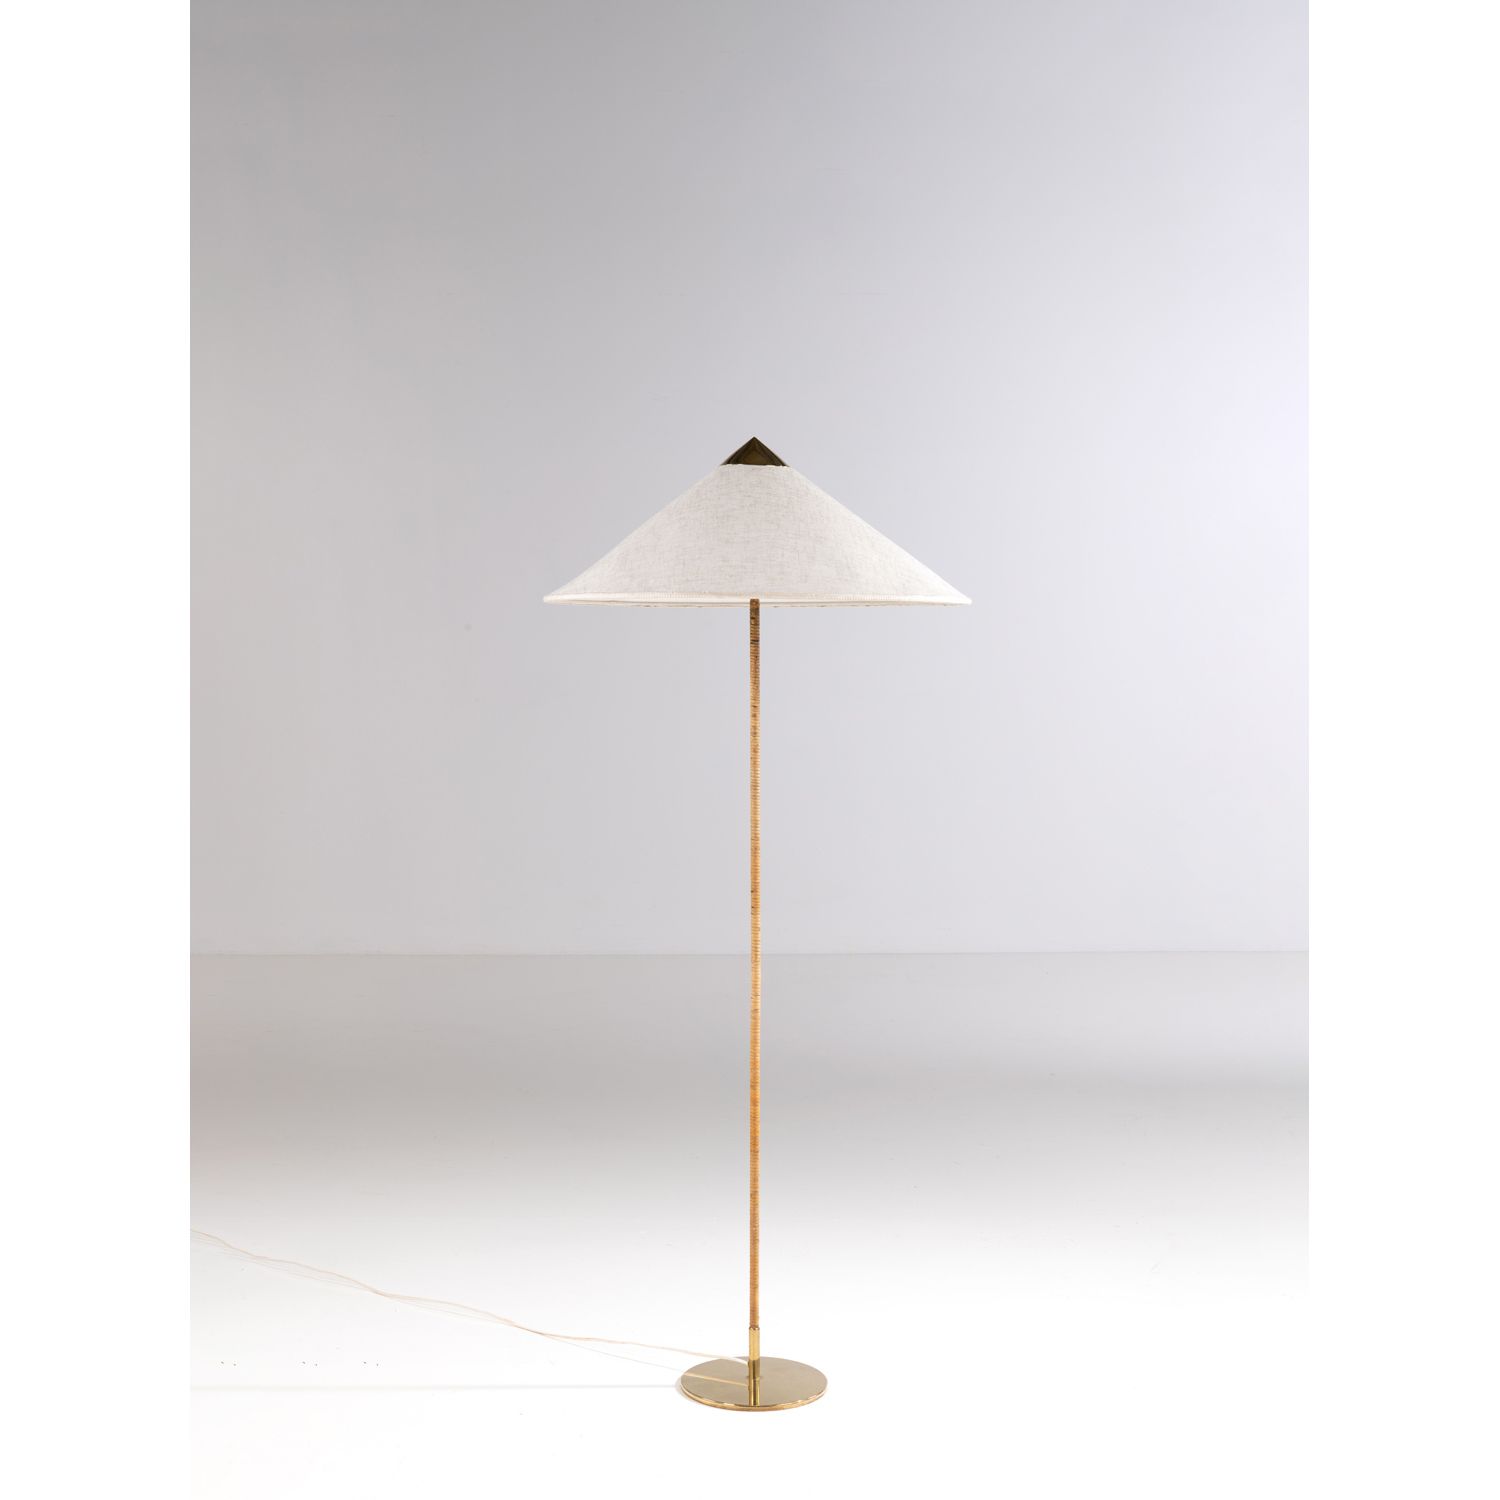 Null Paavo Tynell (1890-1973)

Model n° 9602

Floor lamp

Brass, rattan and fabr&hellip;